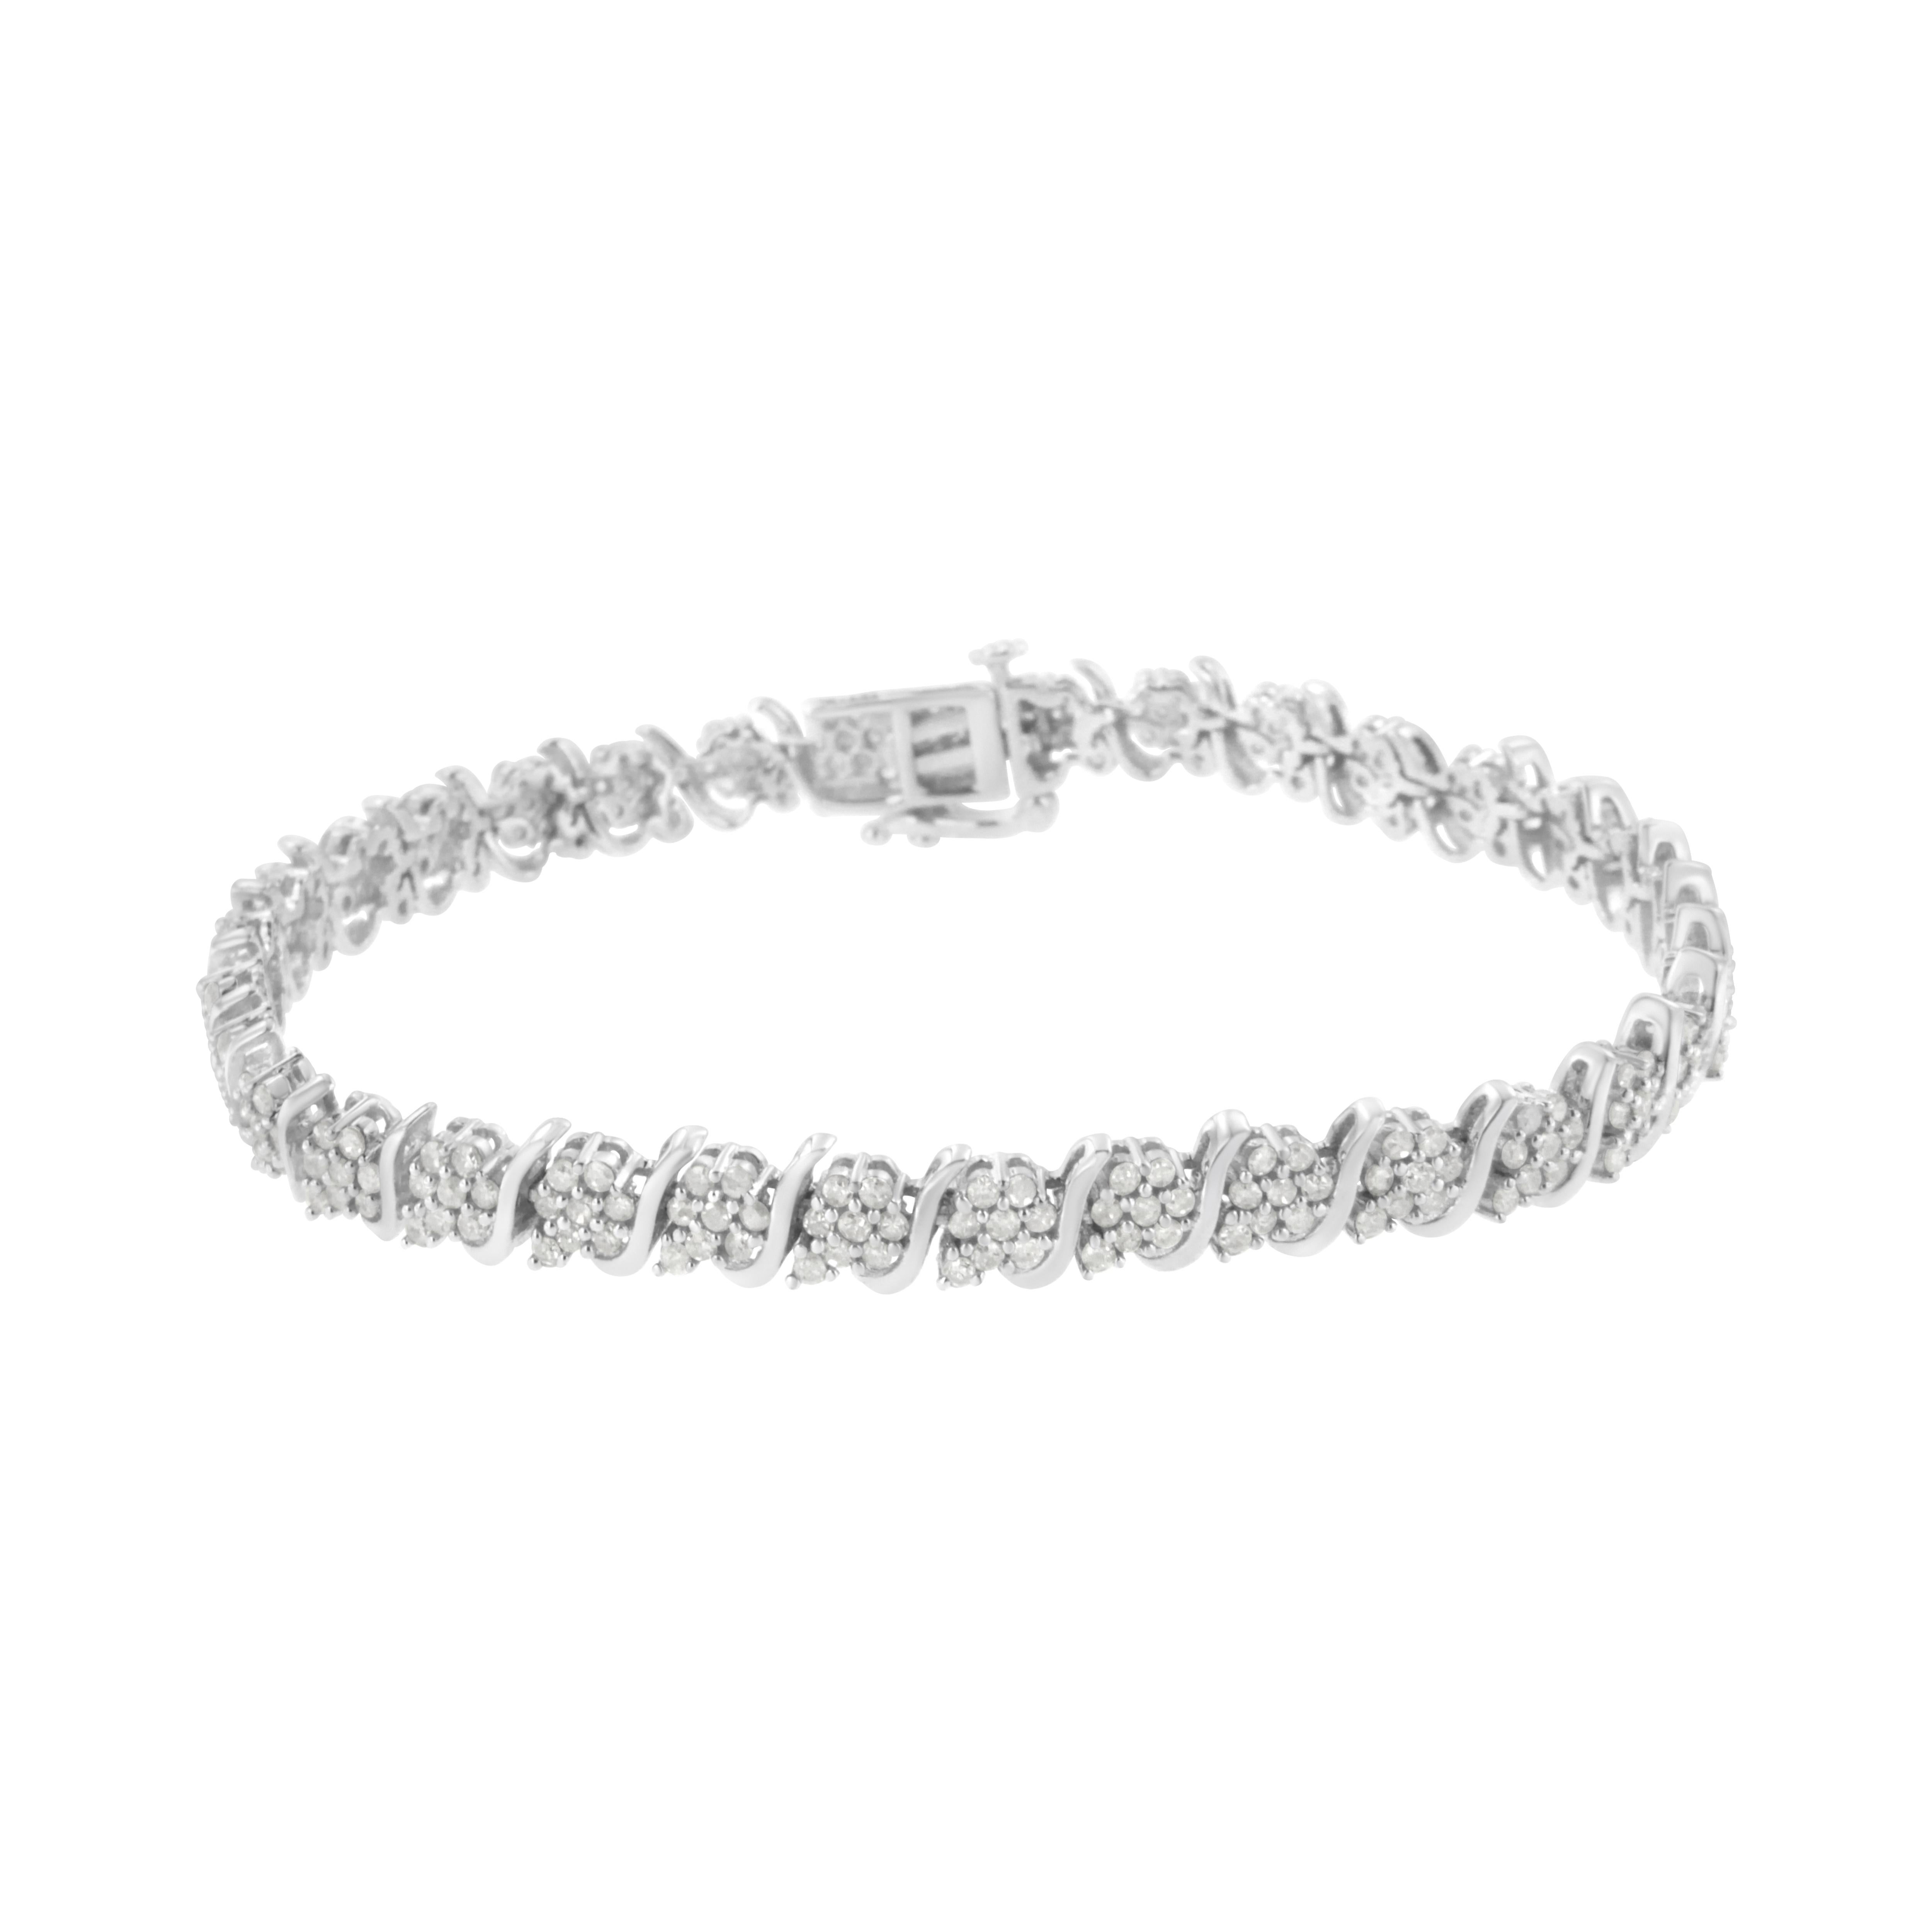 Elegant and beautiful, this flower link bracelet is created in sterling silver and showcases 2 3/4 cttw of sparkling, natural diamonds. 272 round cut diamonds dazzle in this piece. 8 prong set diamonds create each of the flower links that alternate